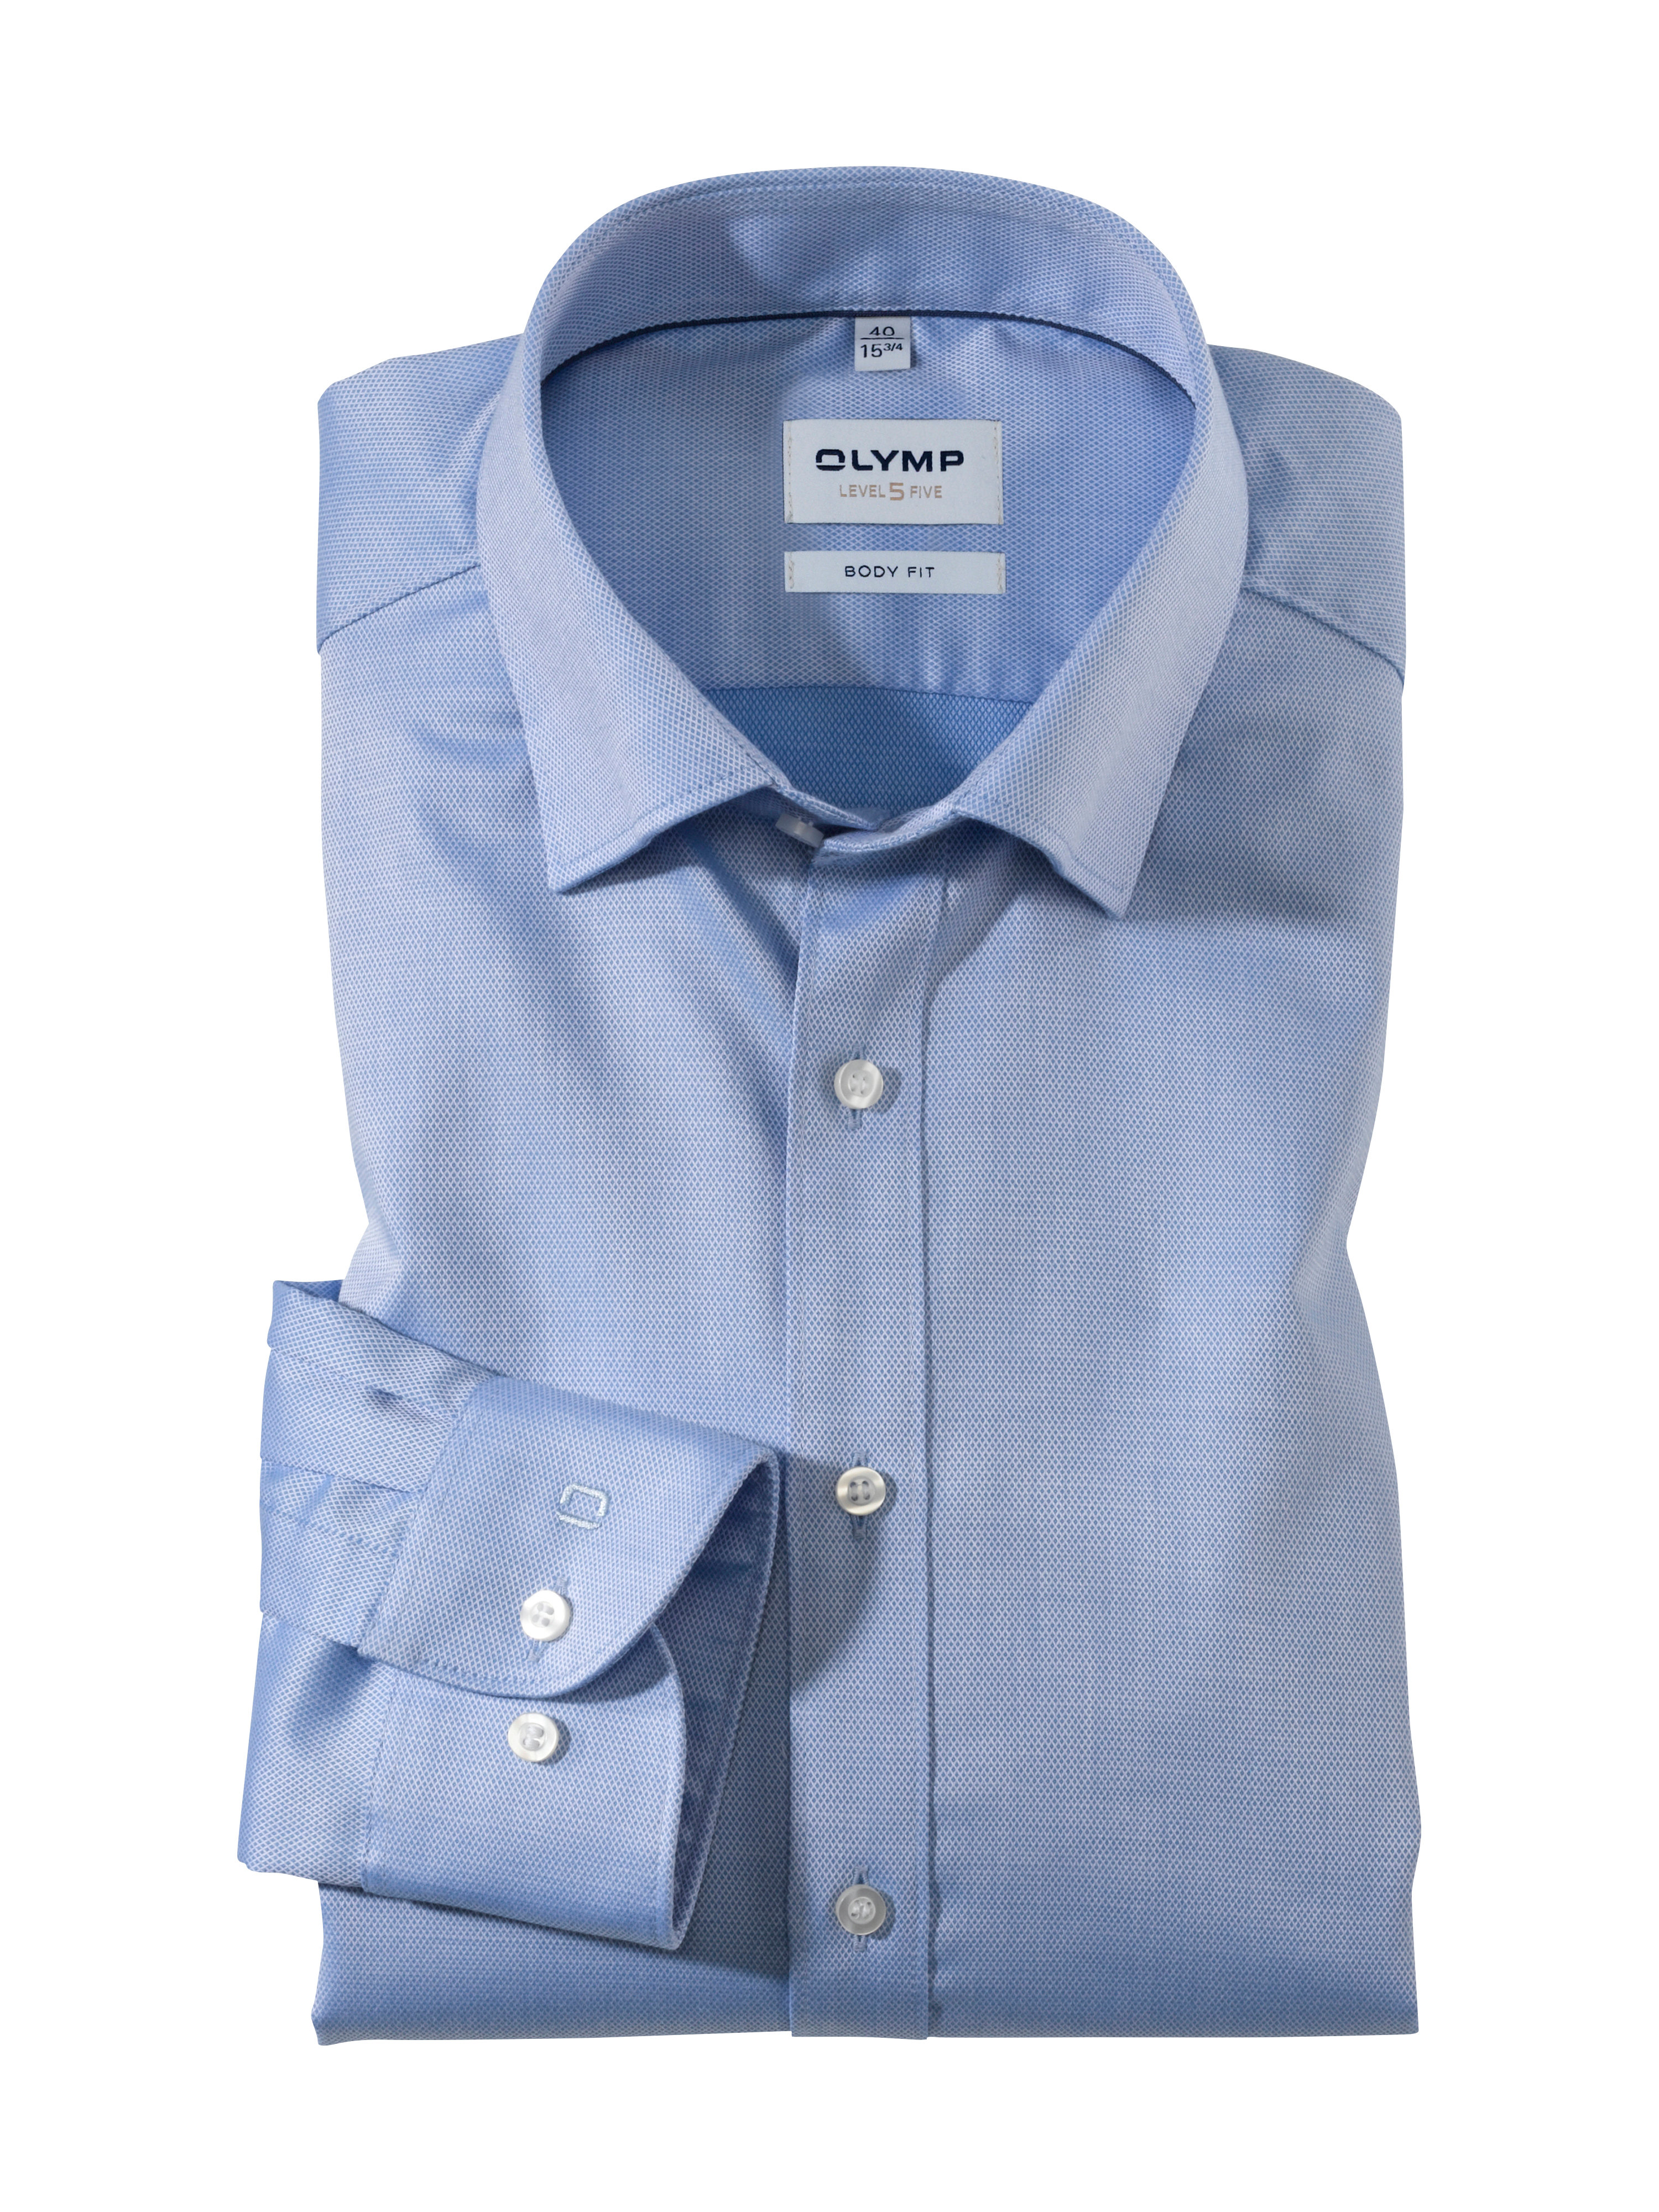 Business shirt | OLYMP Blue button-down - body Level fit, Under | 04646415 Five